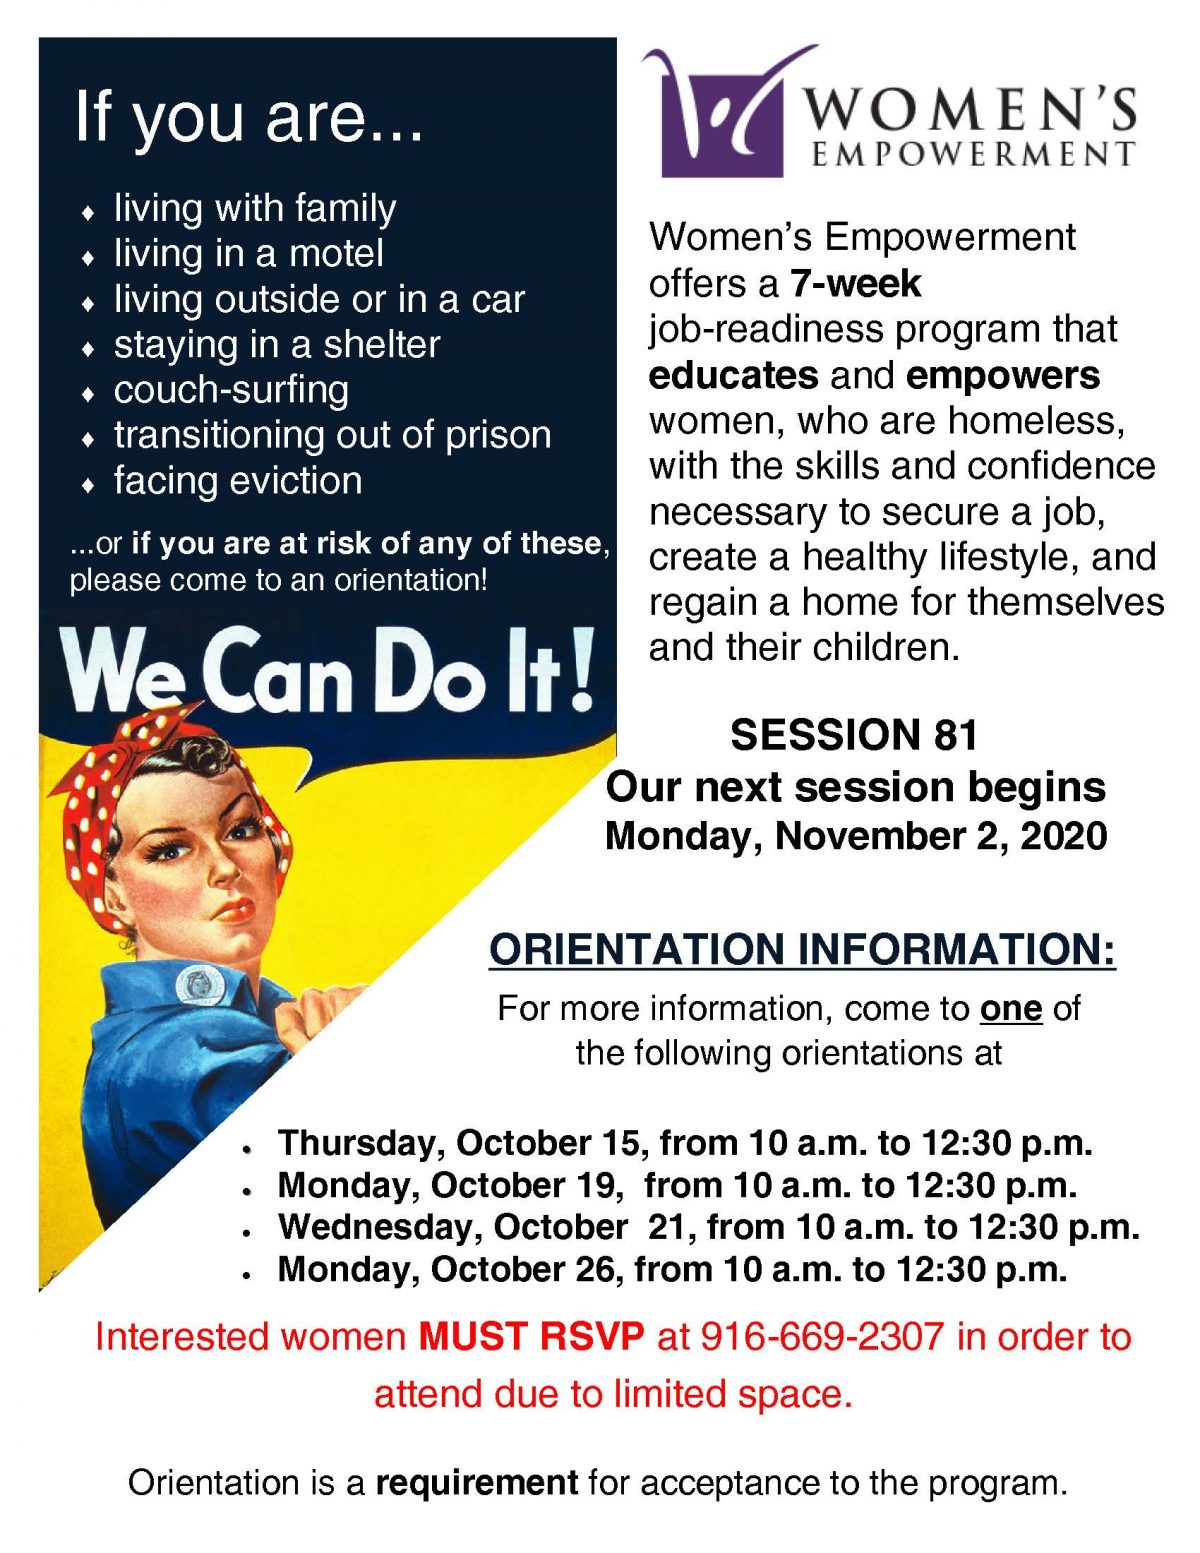 Session 81 Orientations Coming Up - Women's Empowerment